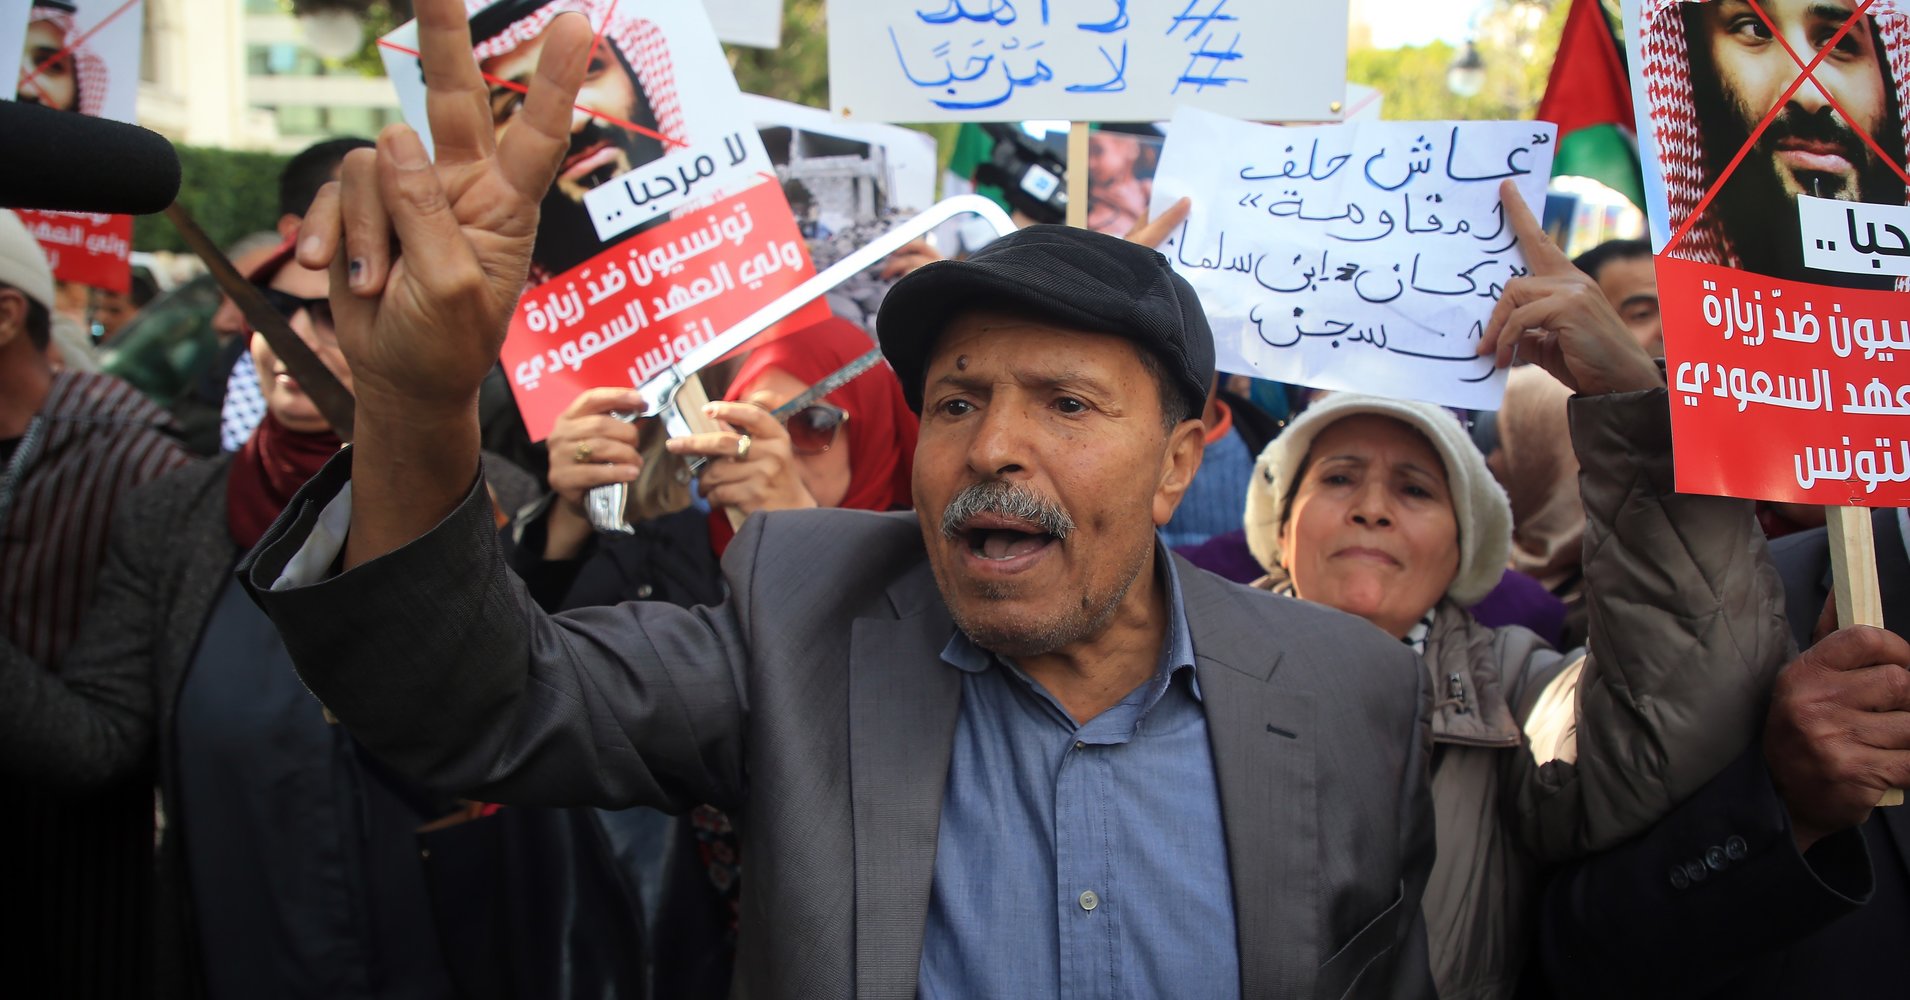 Hundreds Protest In Tunisia Against Saudi Crown Prince's Visit